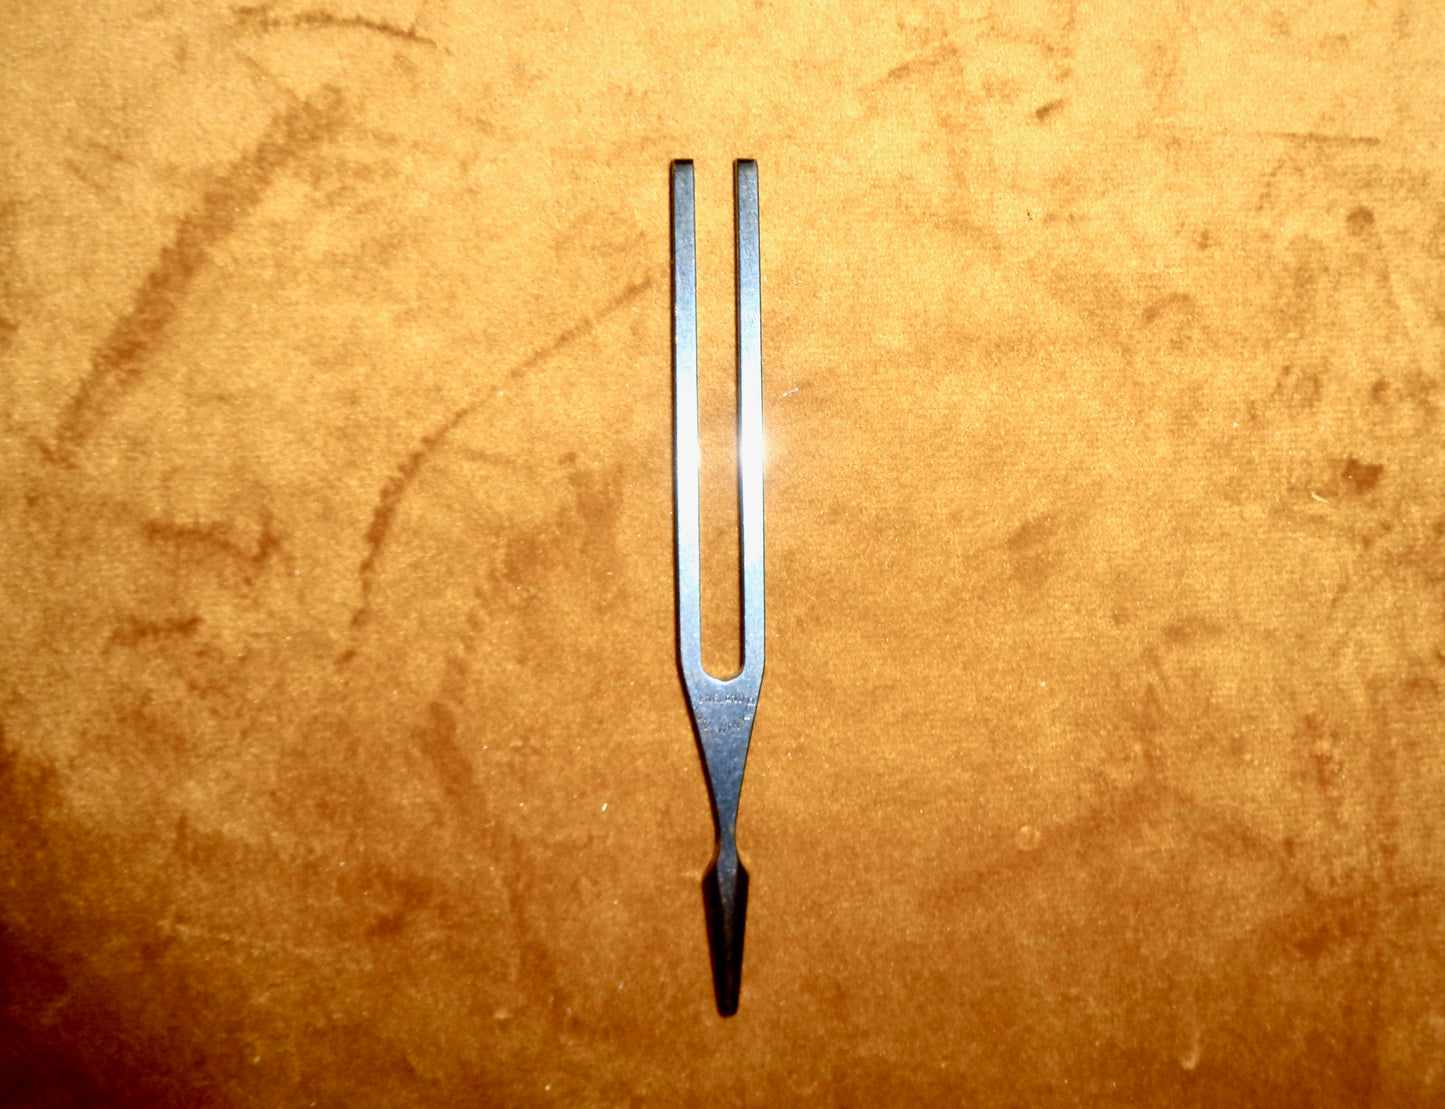 Preowned John Walker Tuning Fork A Standard Frequency 440Hz